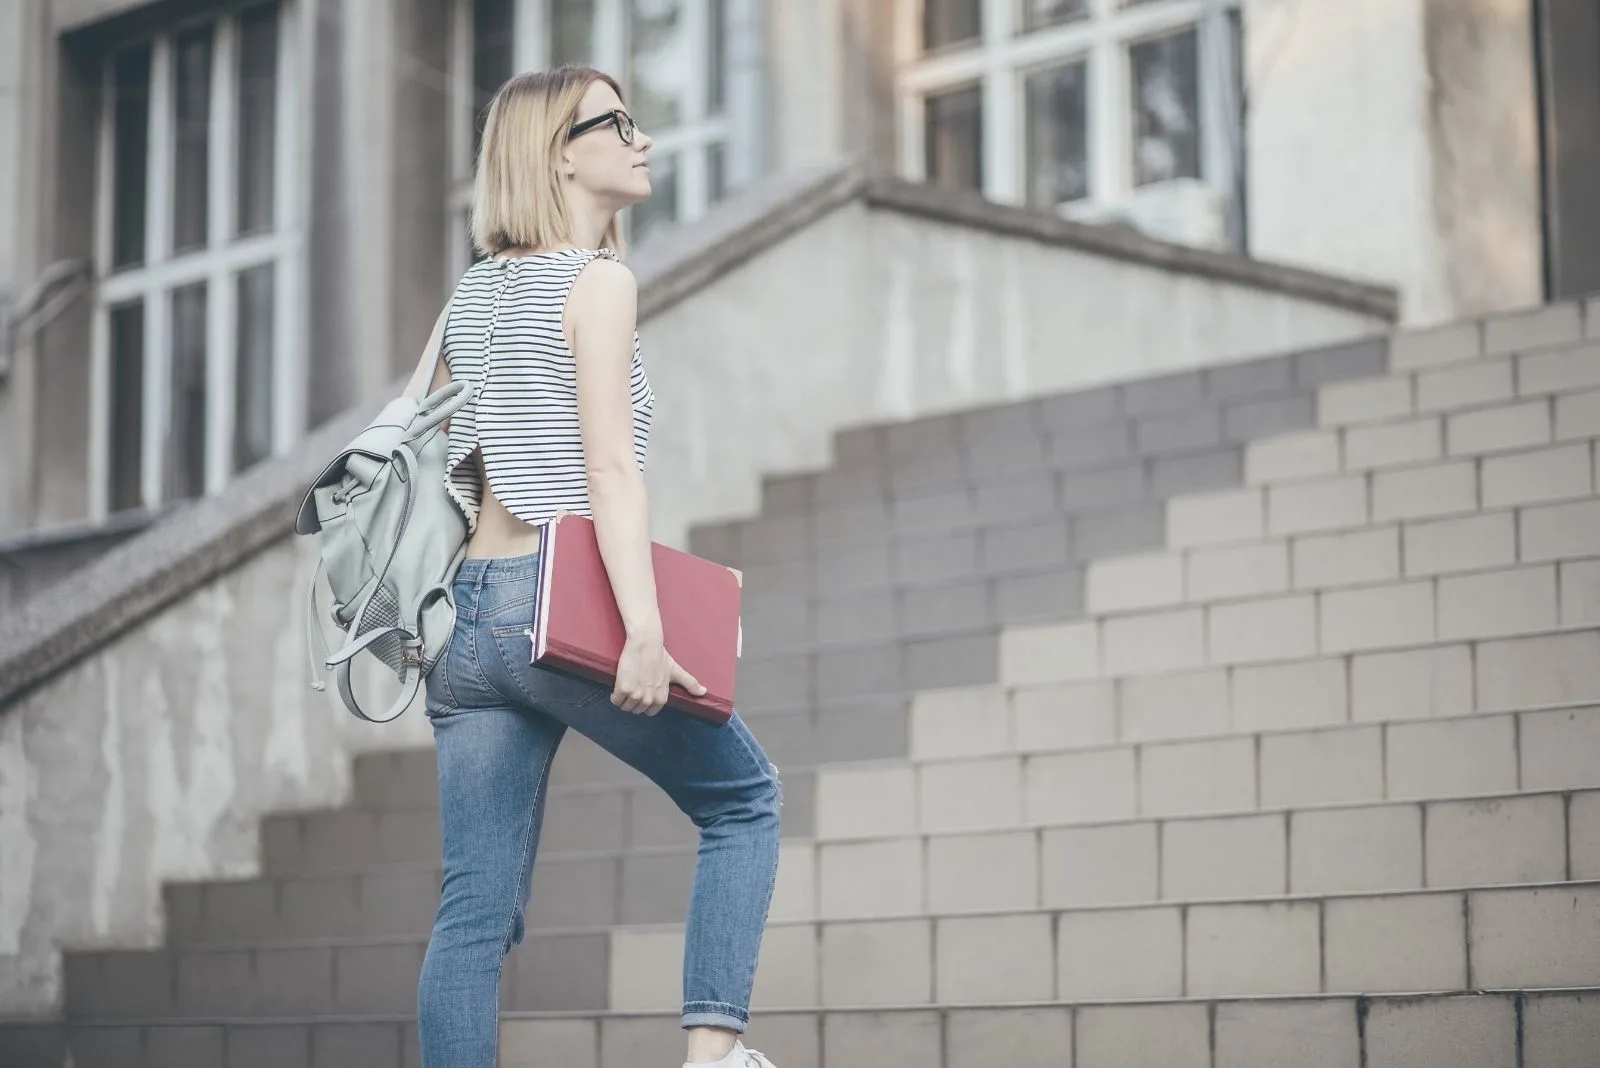 woman student climbing the stairs carrying books and looking hopeful